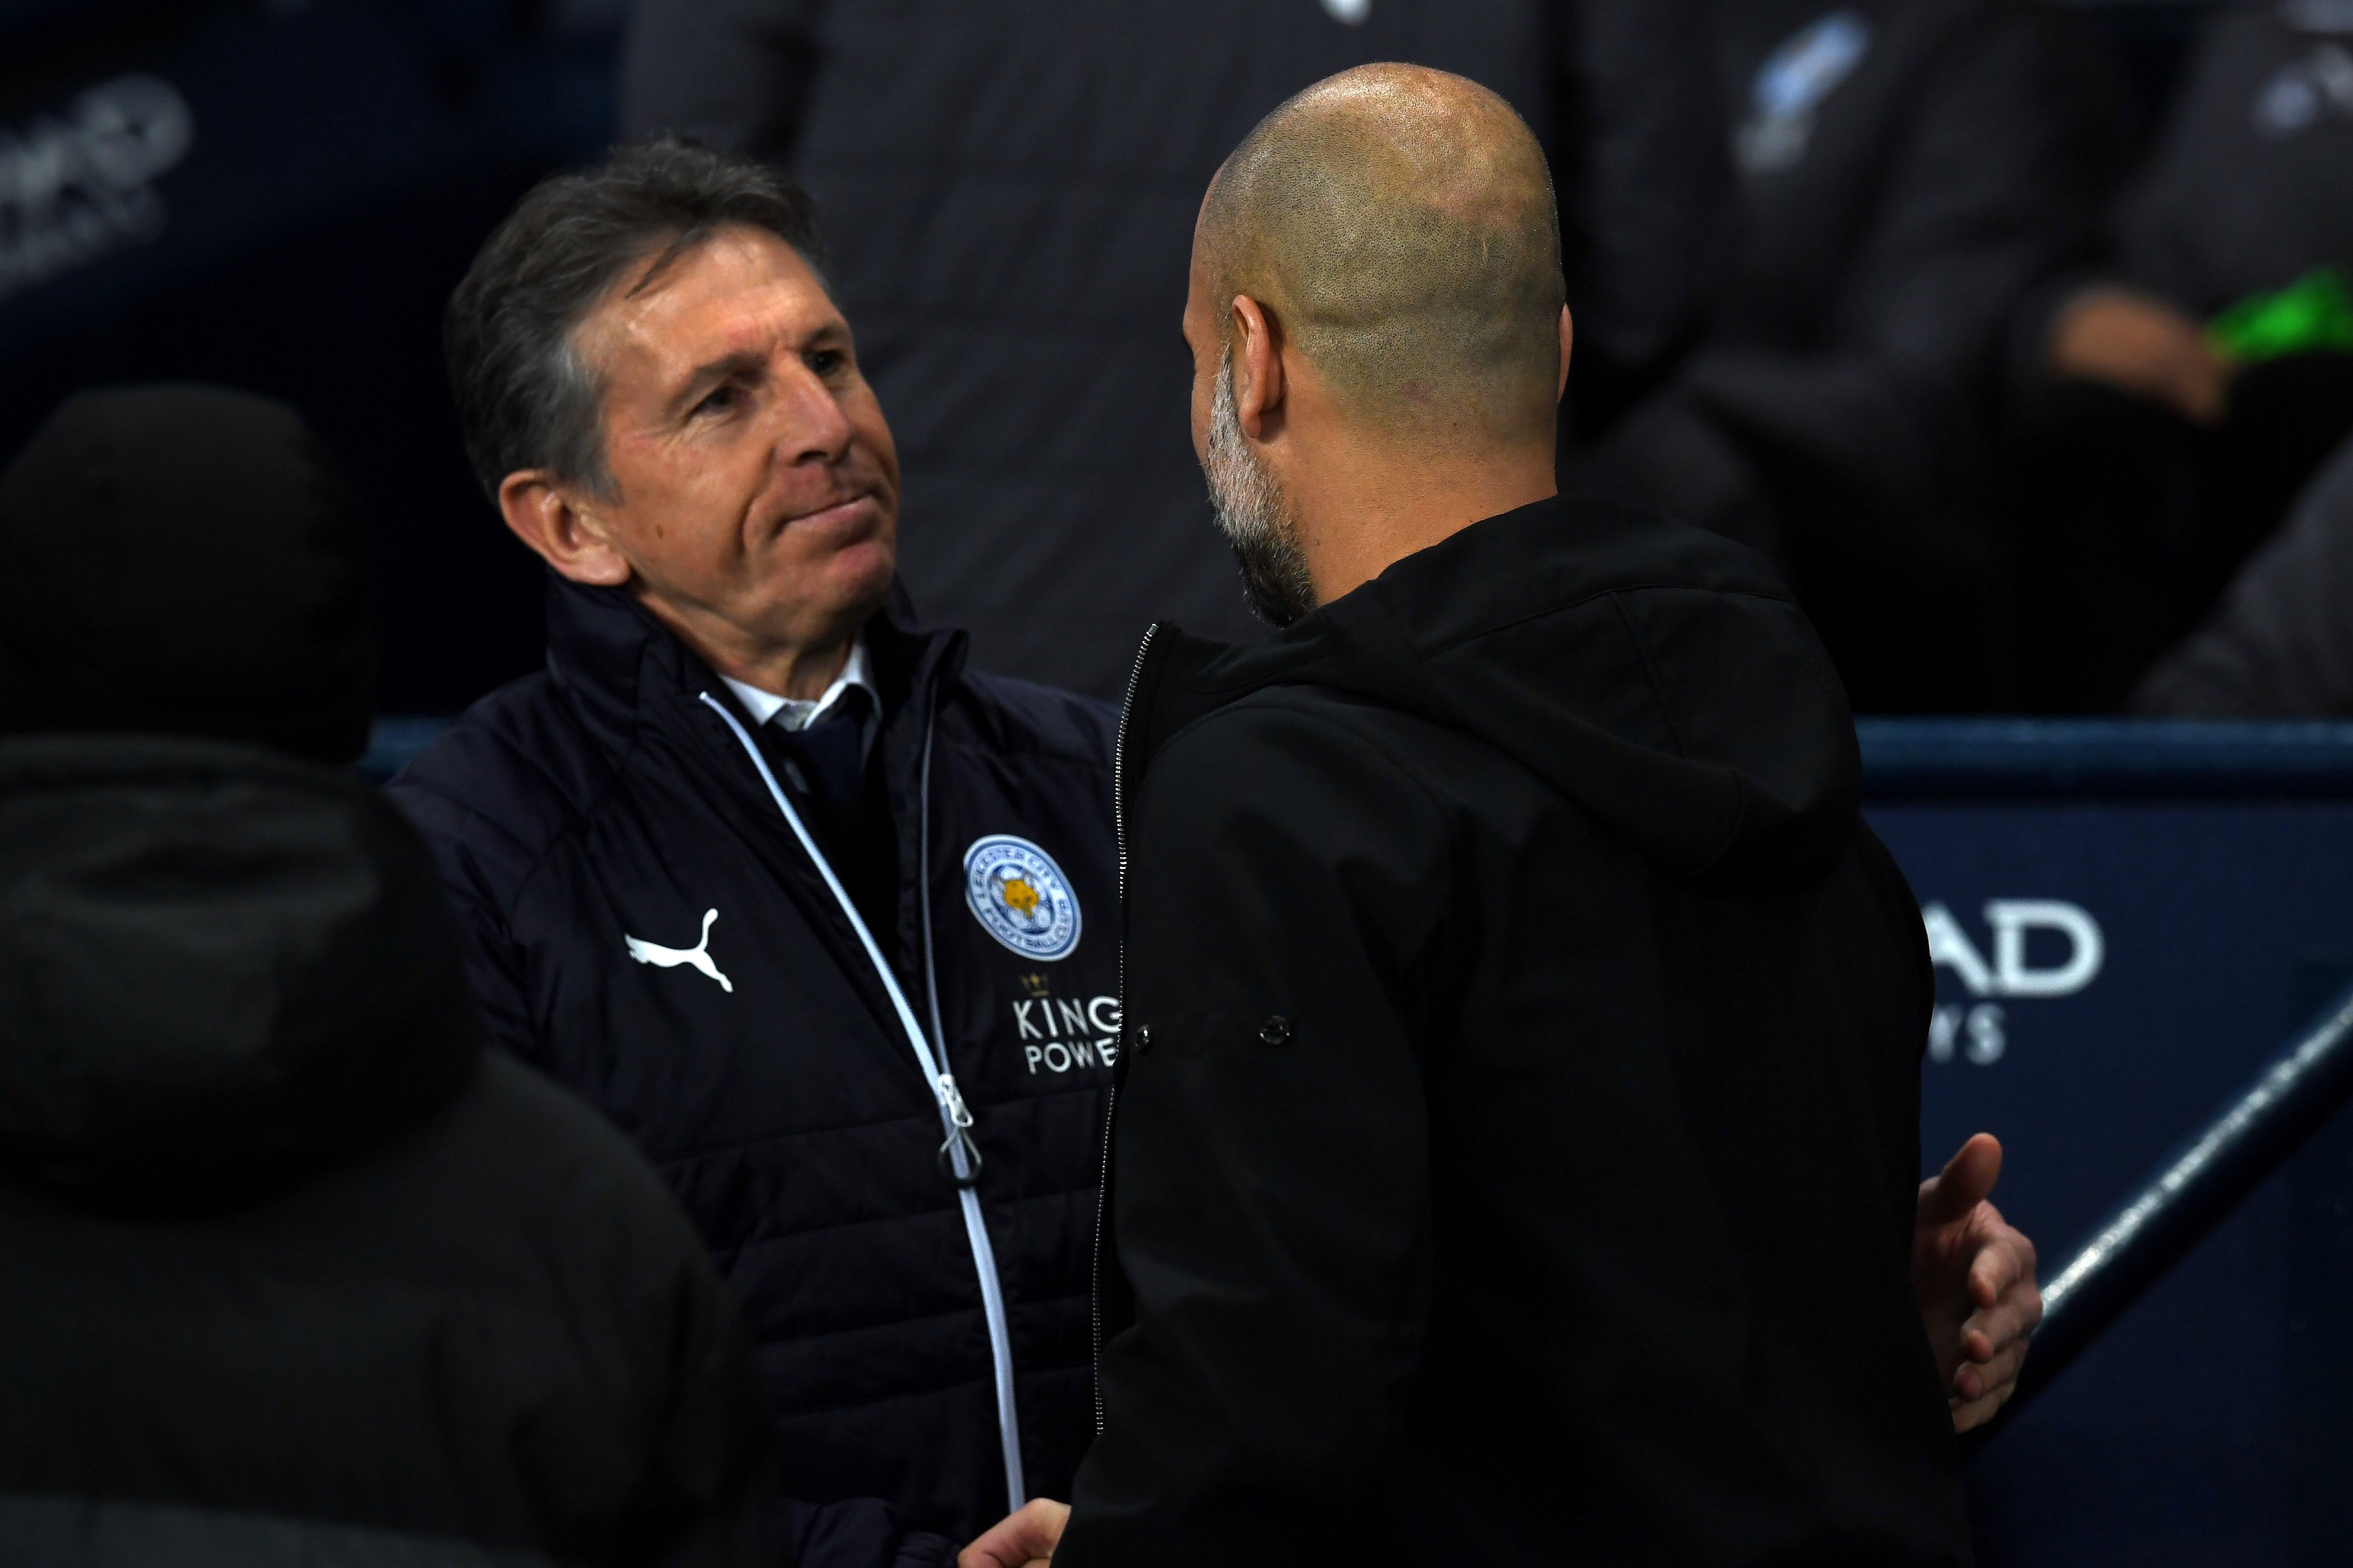 Leicester City's French manager Claude Puel (L) and Manchester City's Spanish manager Pep Guardiola greet before the English Premier League football match between Manchester City and Leicester City at the Etihad Stadium in Manchester, north west England, on February 10, 2018. / AFP PHOTO / Paul ELLIS / RESTRICTED TO EDITORIAL USE. No use with unauthorized audio, video, data, fixture lists, club/league logos or 'live' services. Online in-match use limited to 75 images, no video emulation. No use in betting, games or single club/league/player publications.  /         (Photo credit should read PAUL ELLIS/AFP/Getty Images)